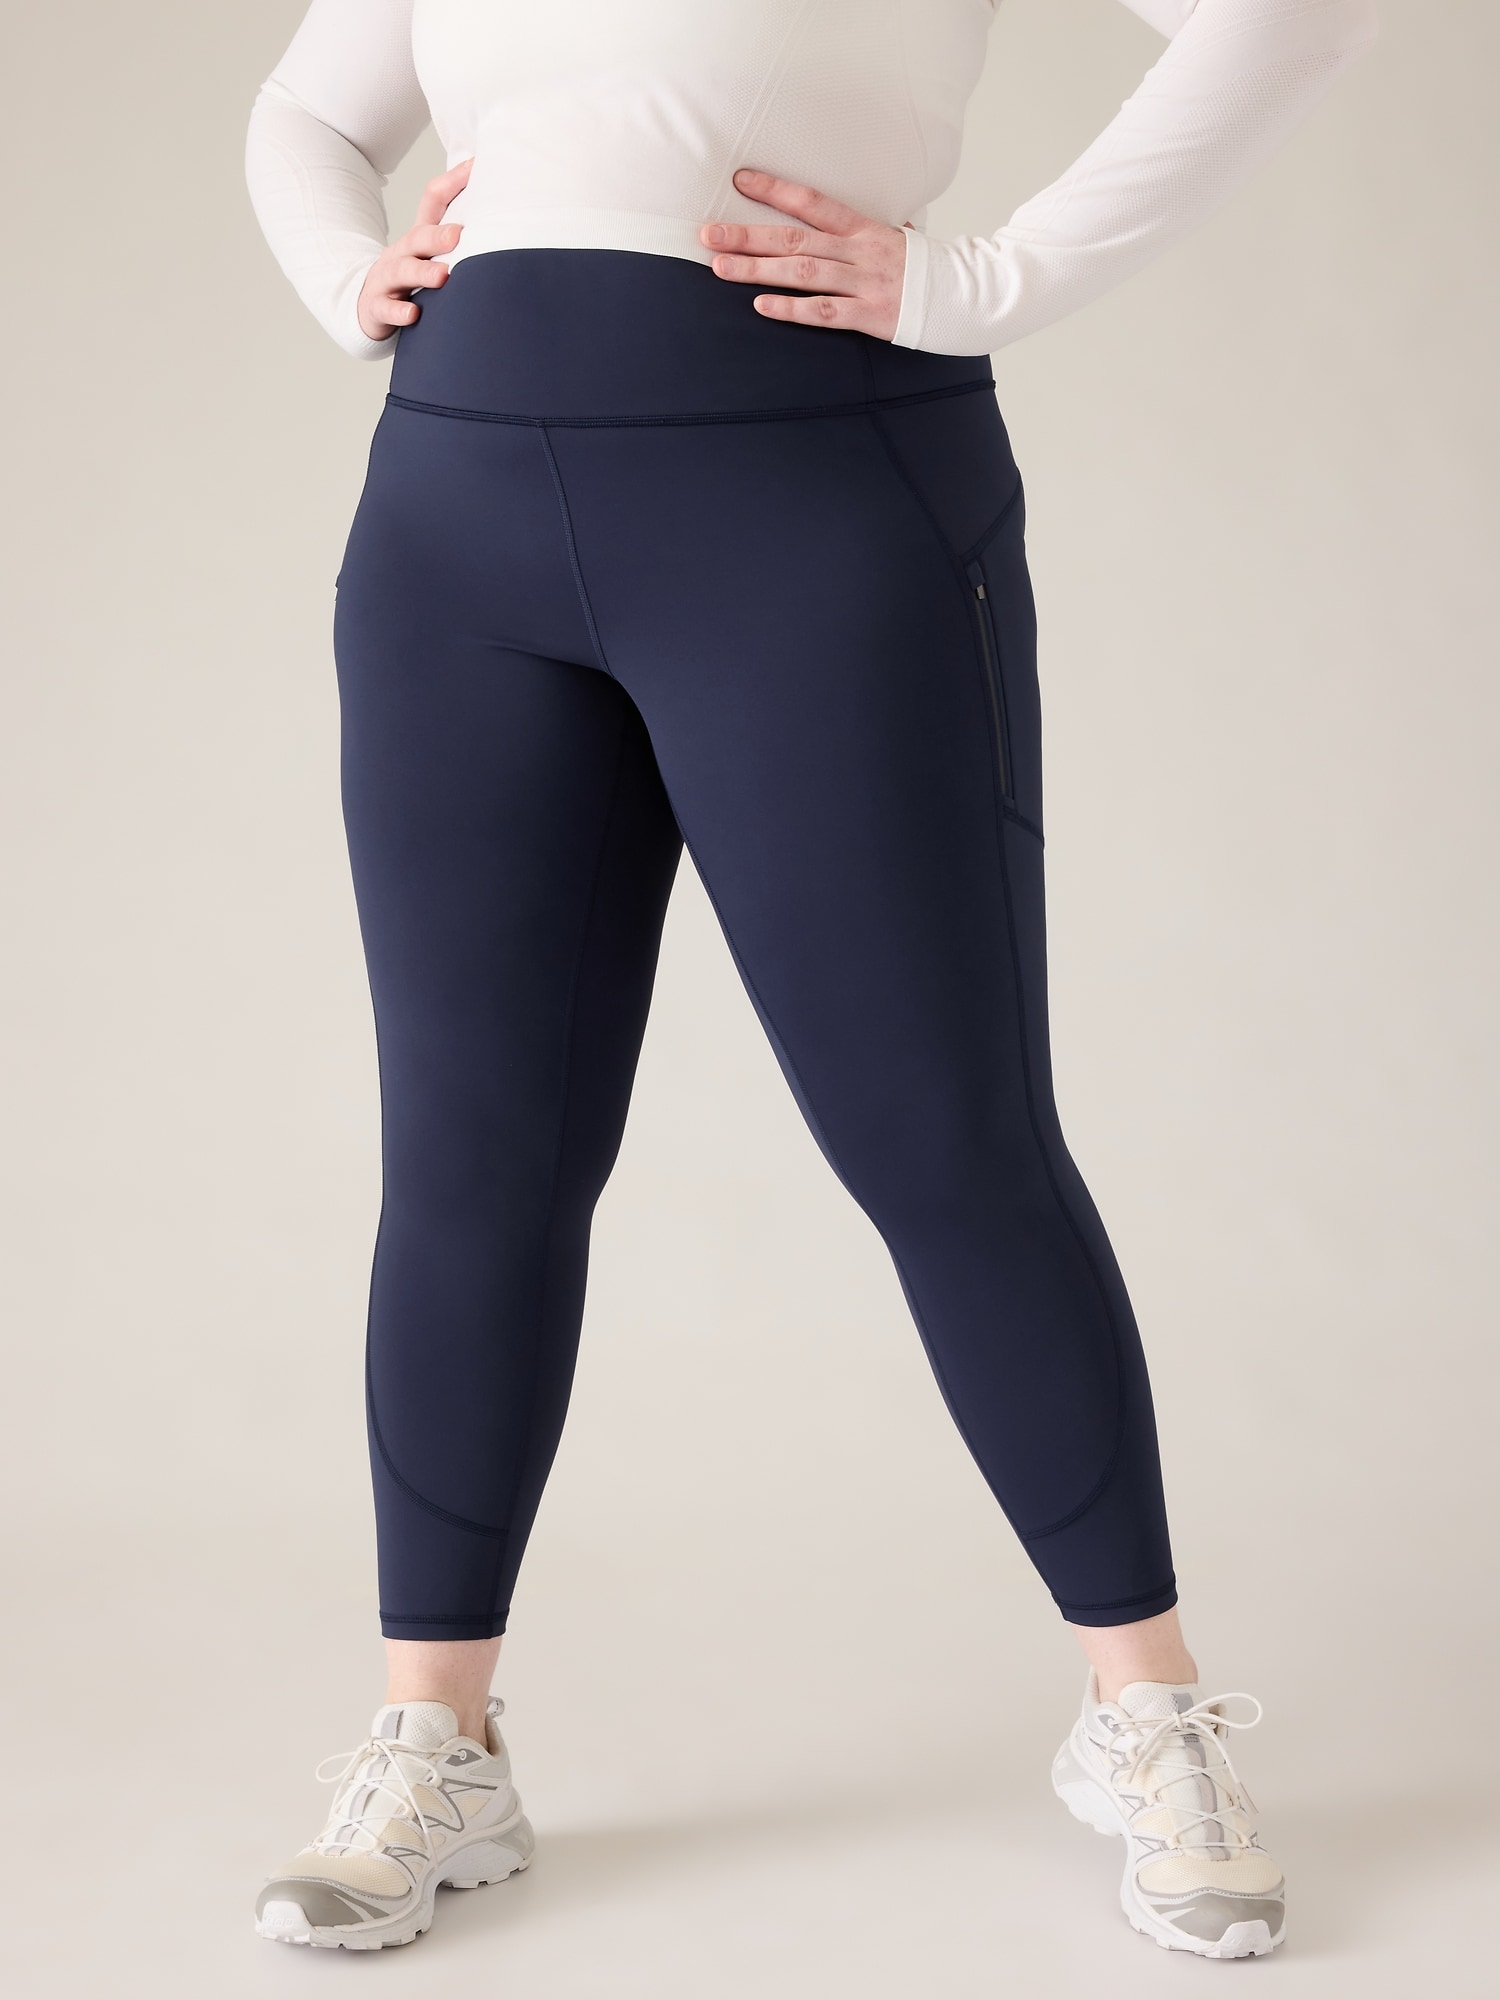 Women's Tall Reflective Active Legging With Pockets Midnight Blue